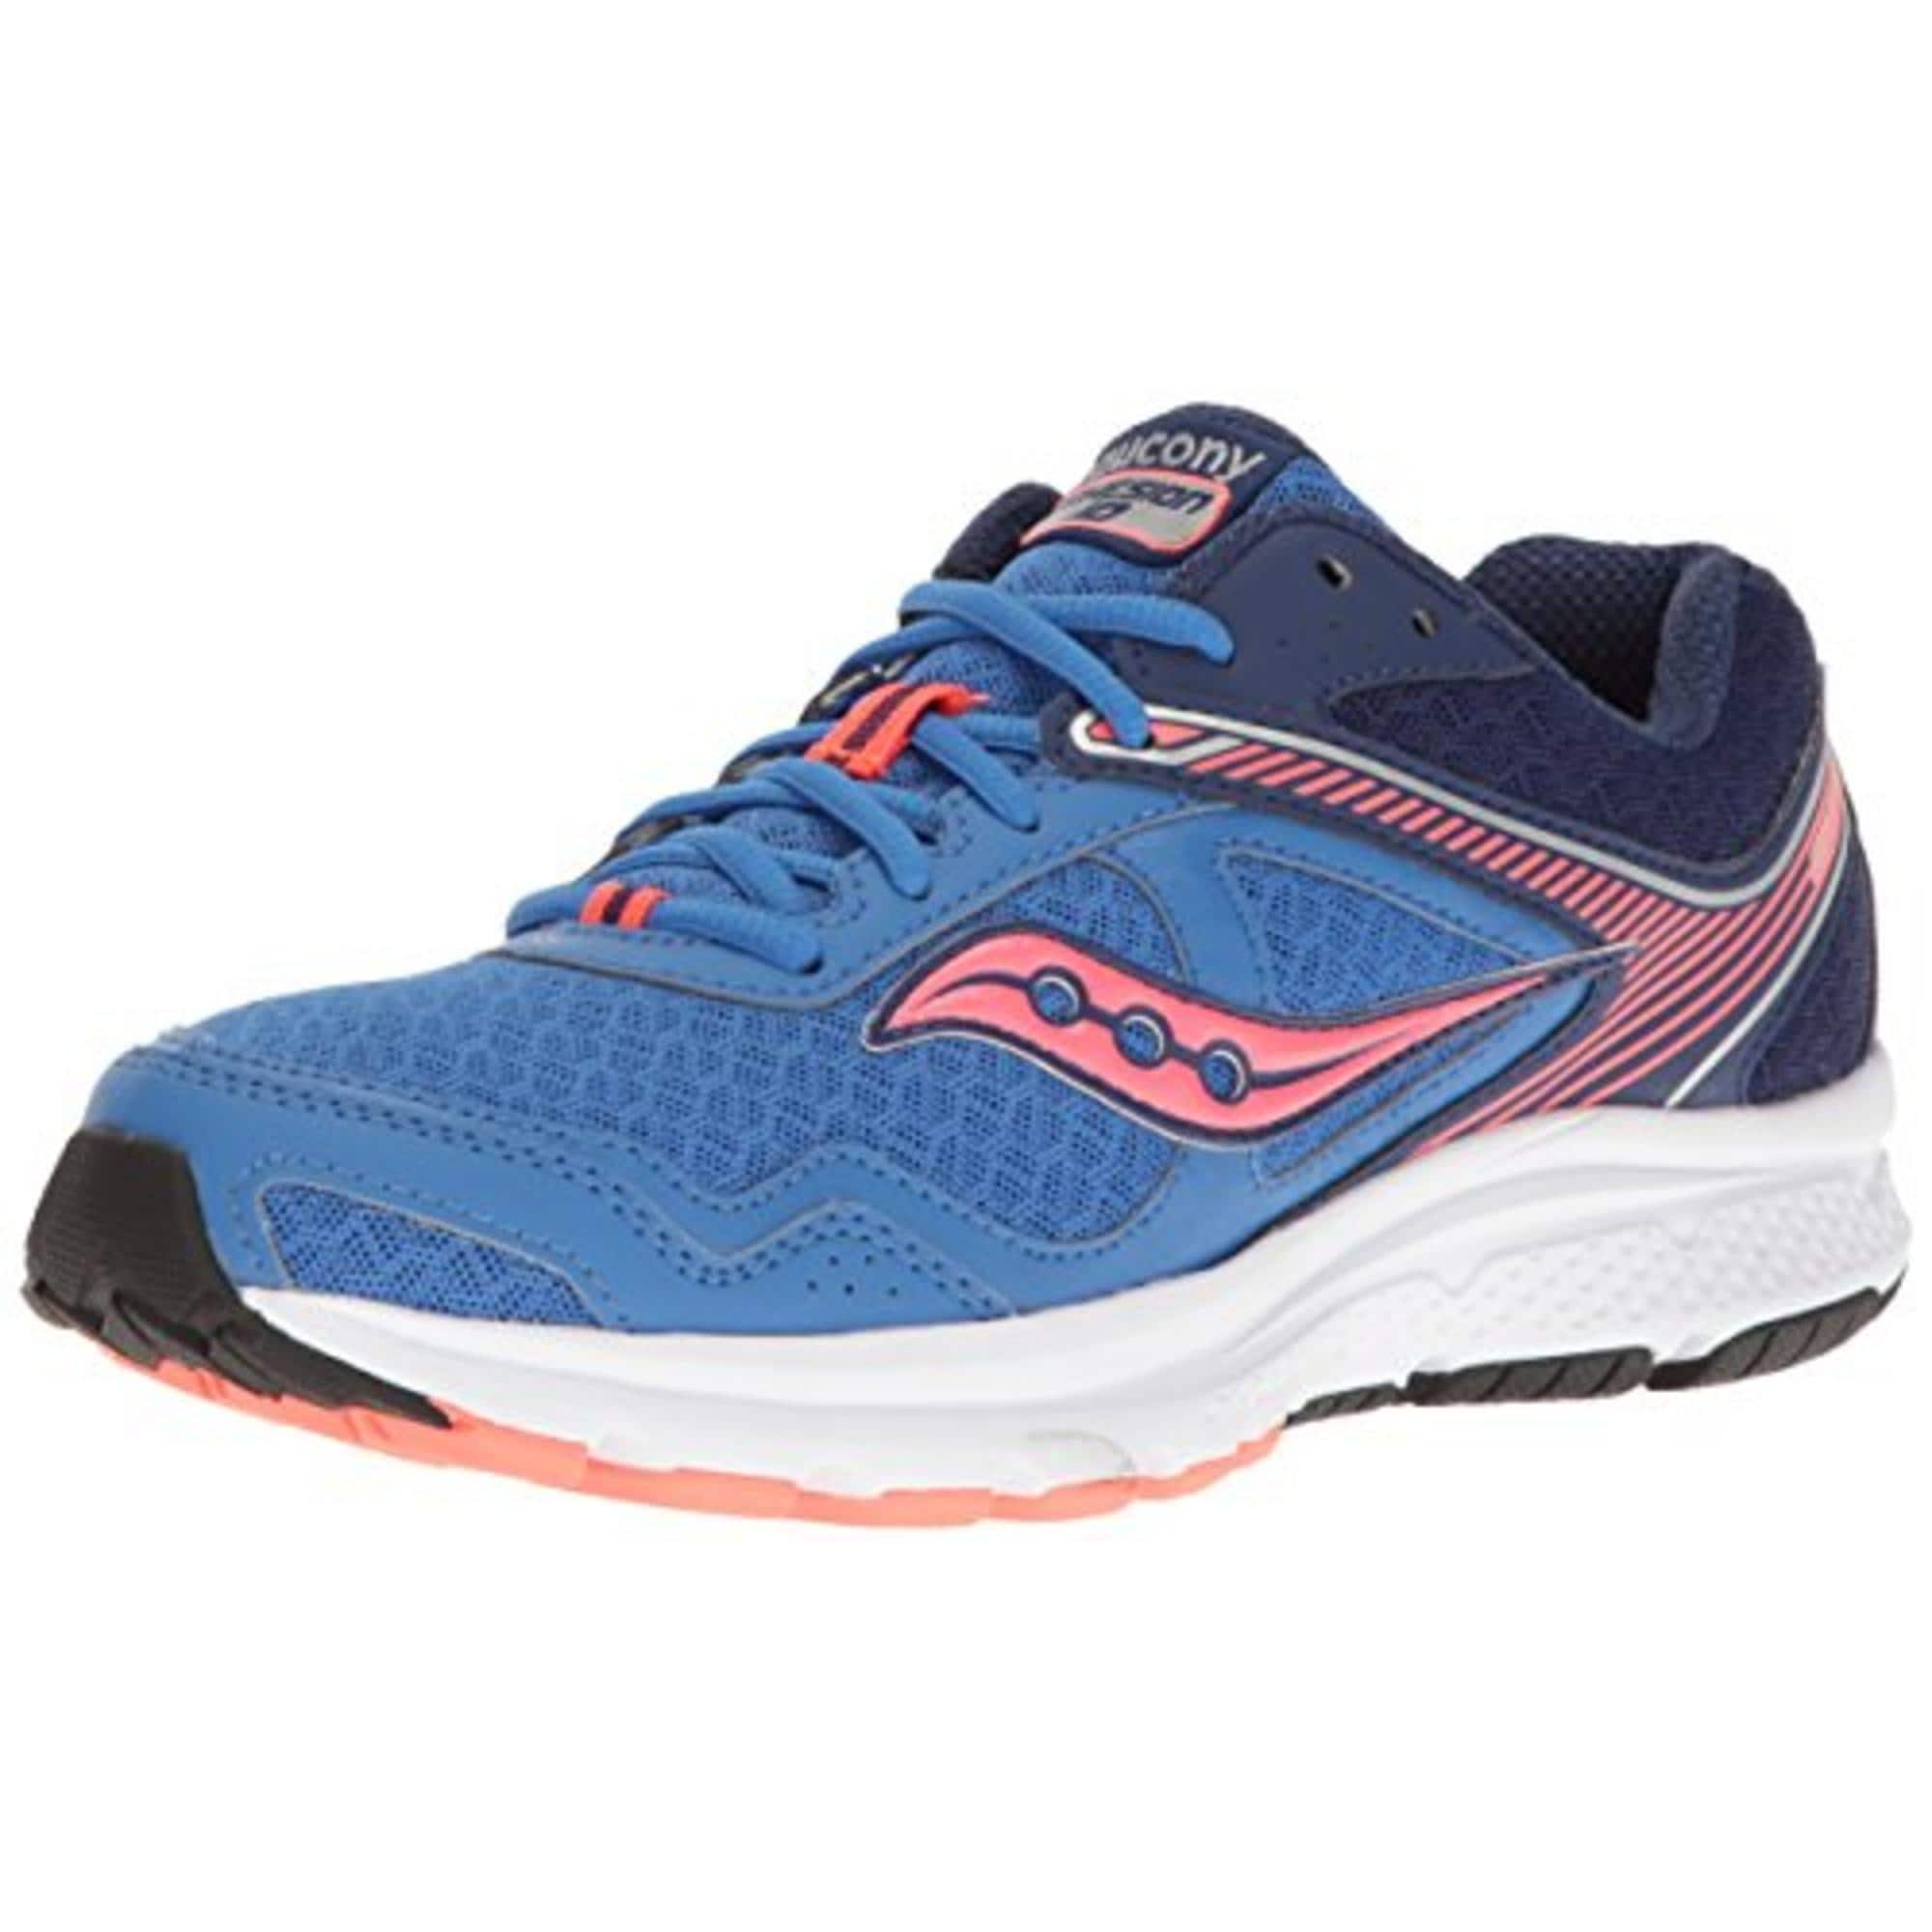 saucony grid cohesion 10 wide